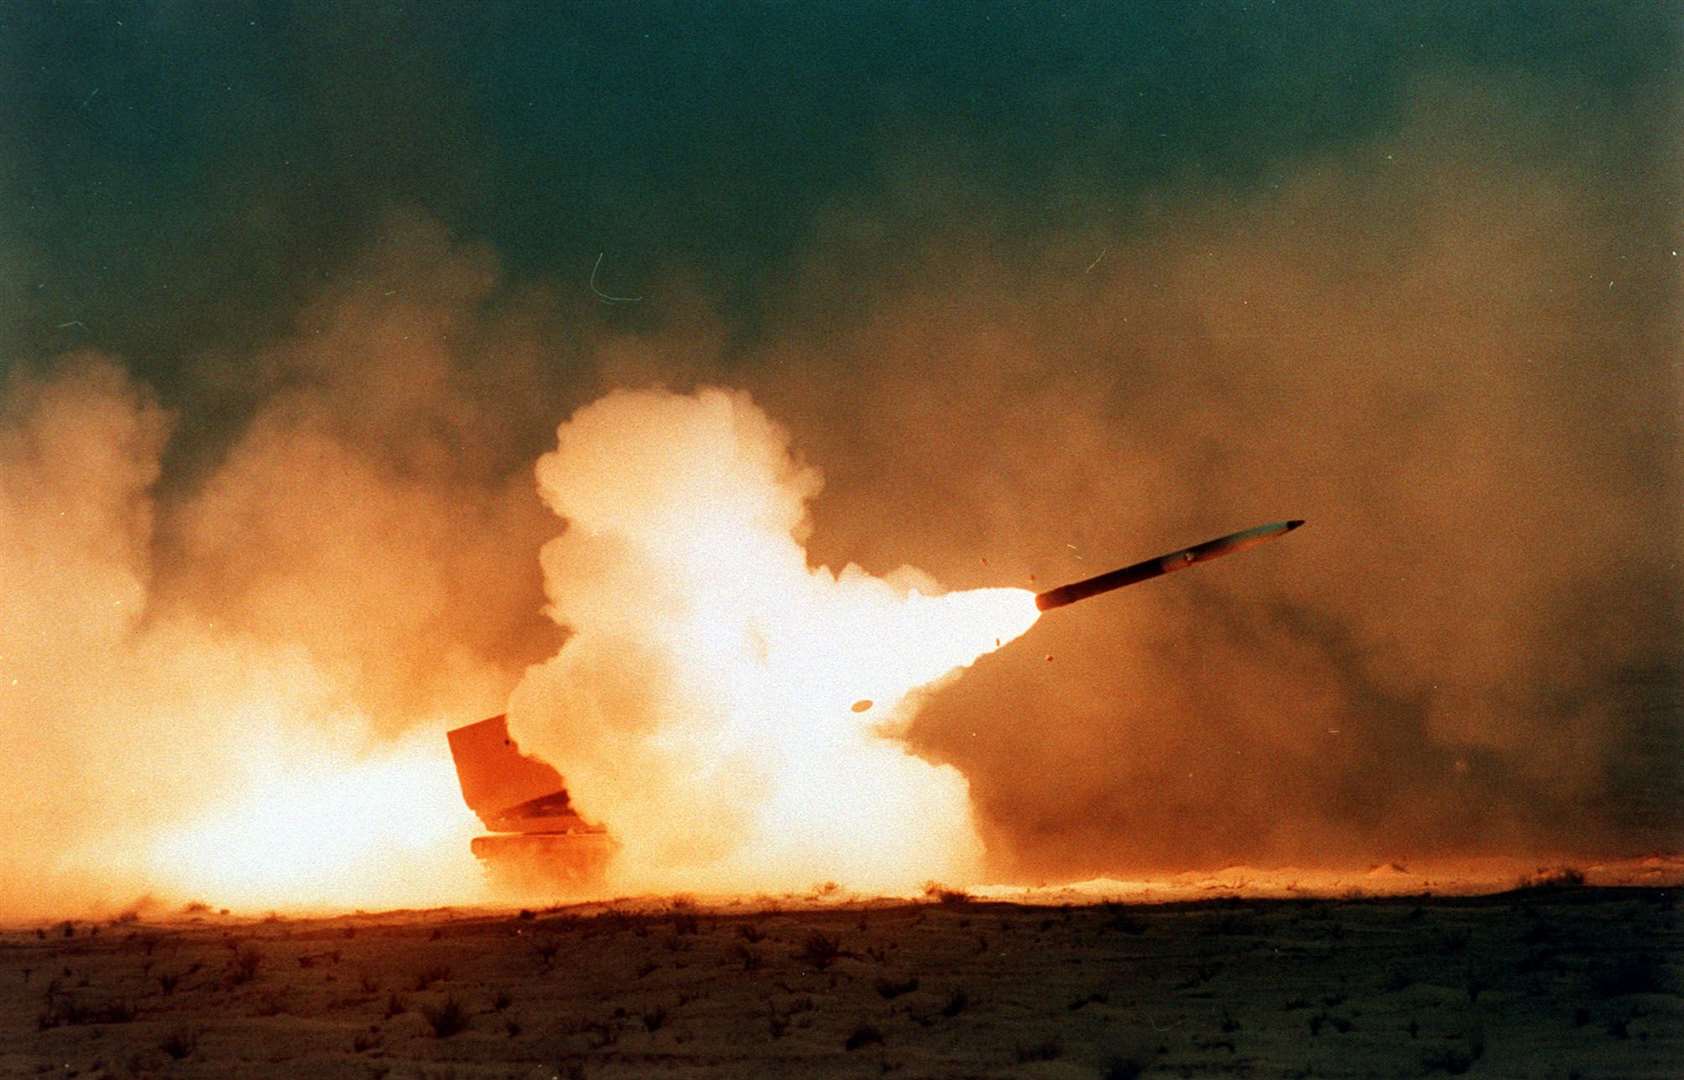 A multiple launch rocket system fired in the Saudi desert by 2nd Field Artillery during the Gulf War (Mike Moore/PA)